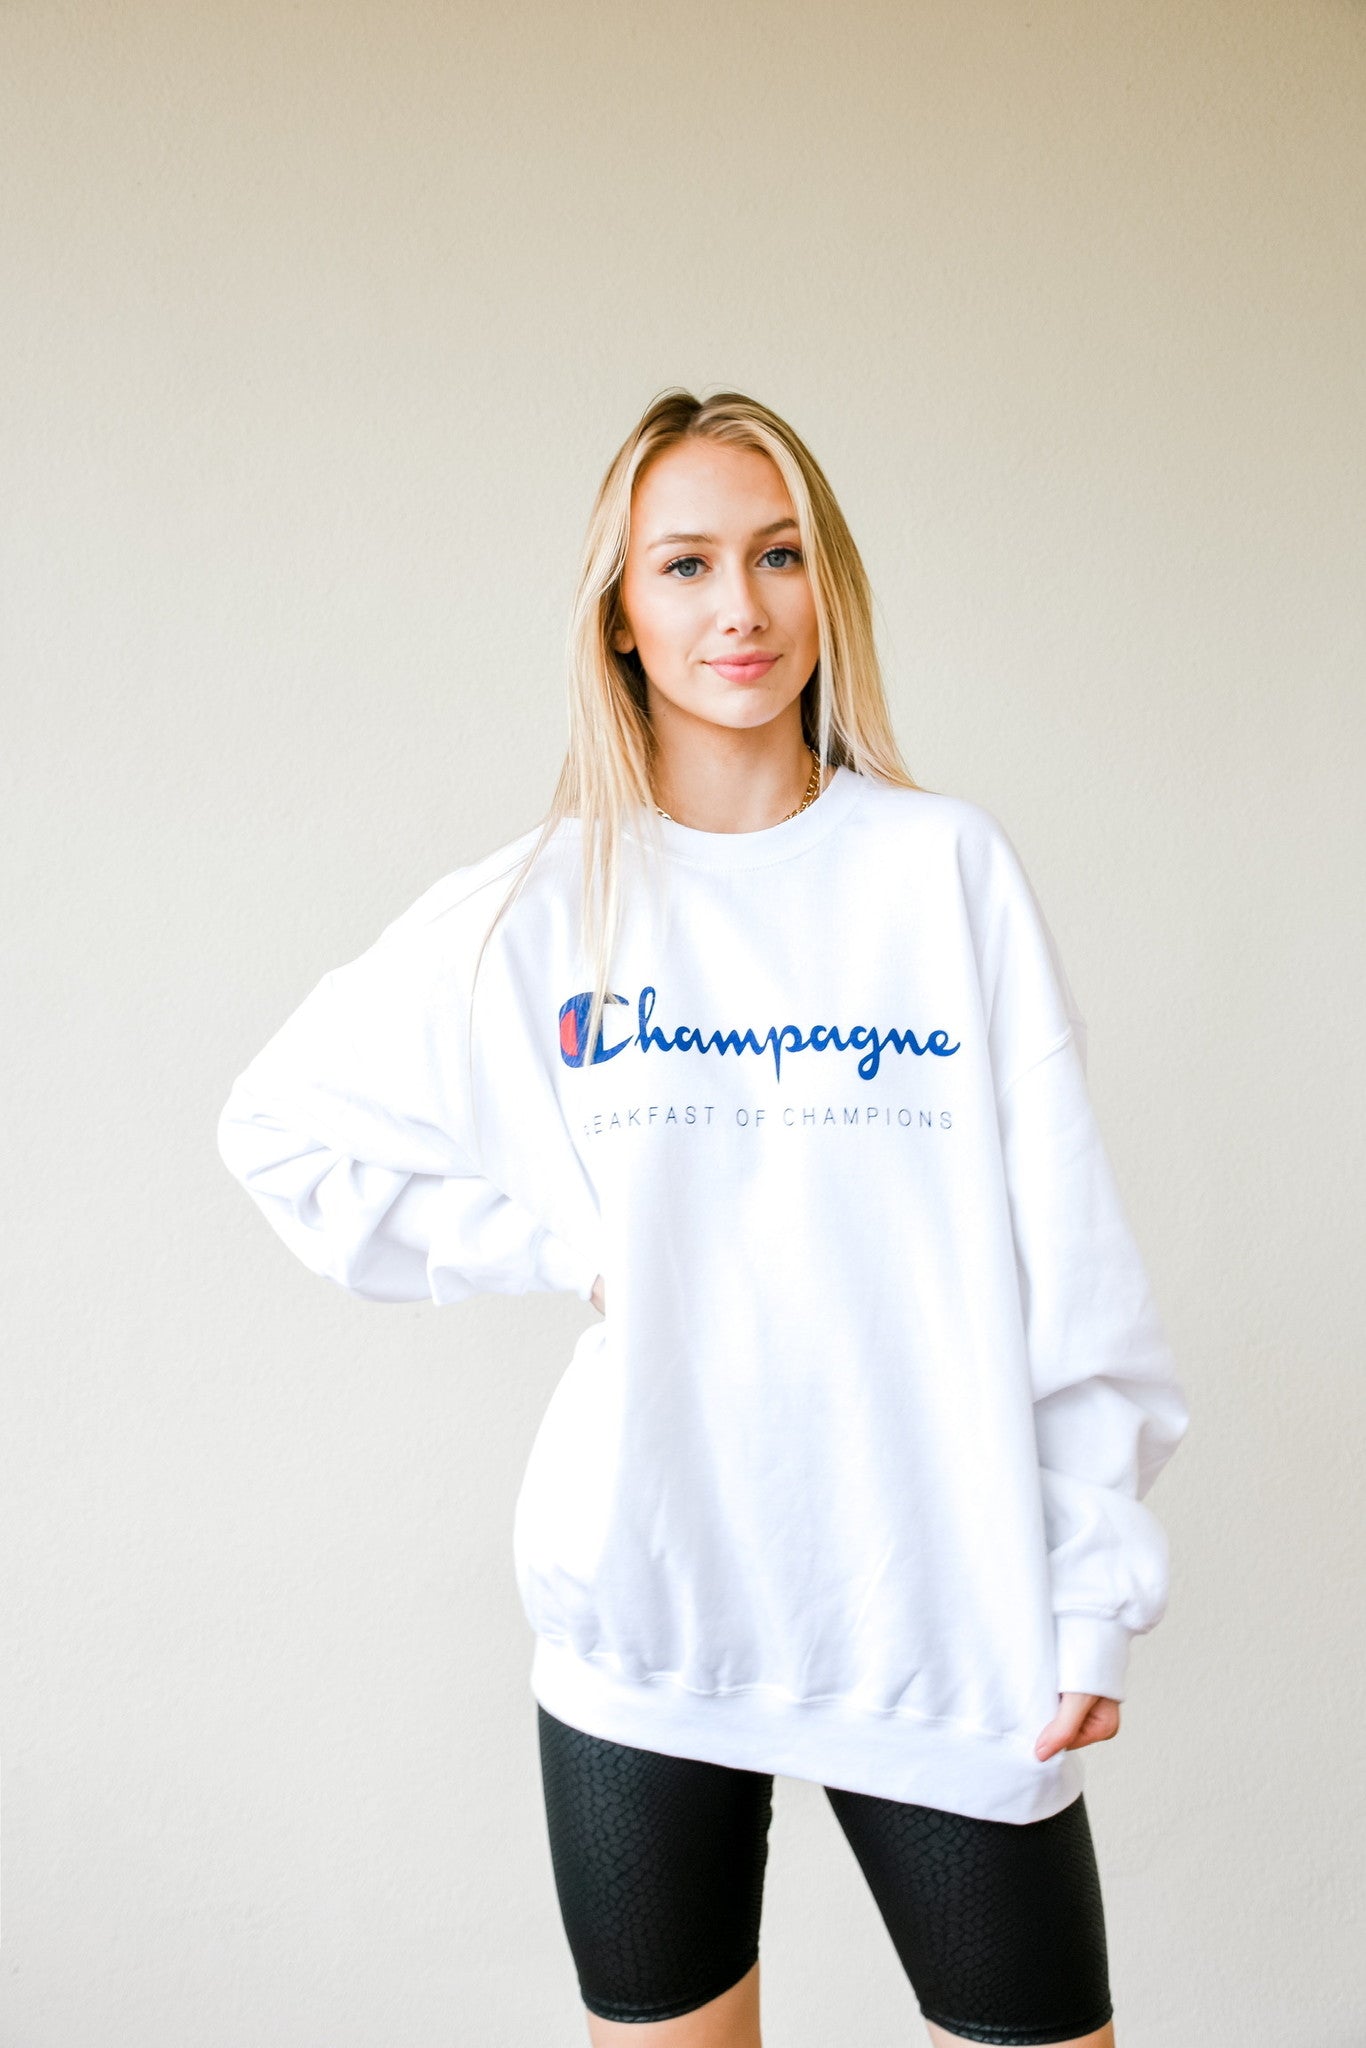 Champagne for Breakfast Crewneck